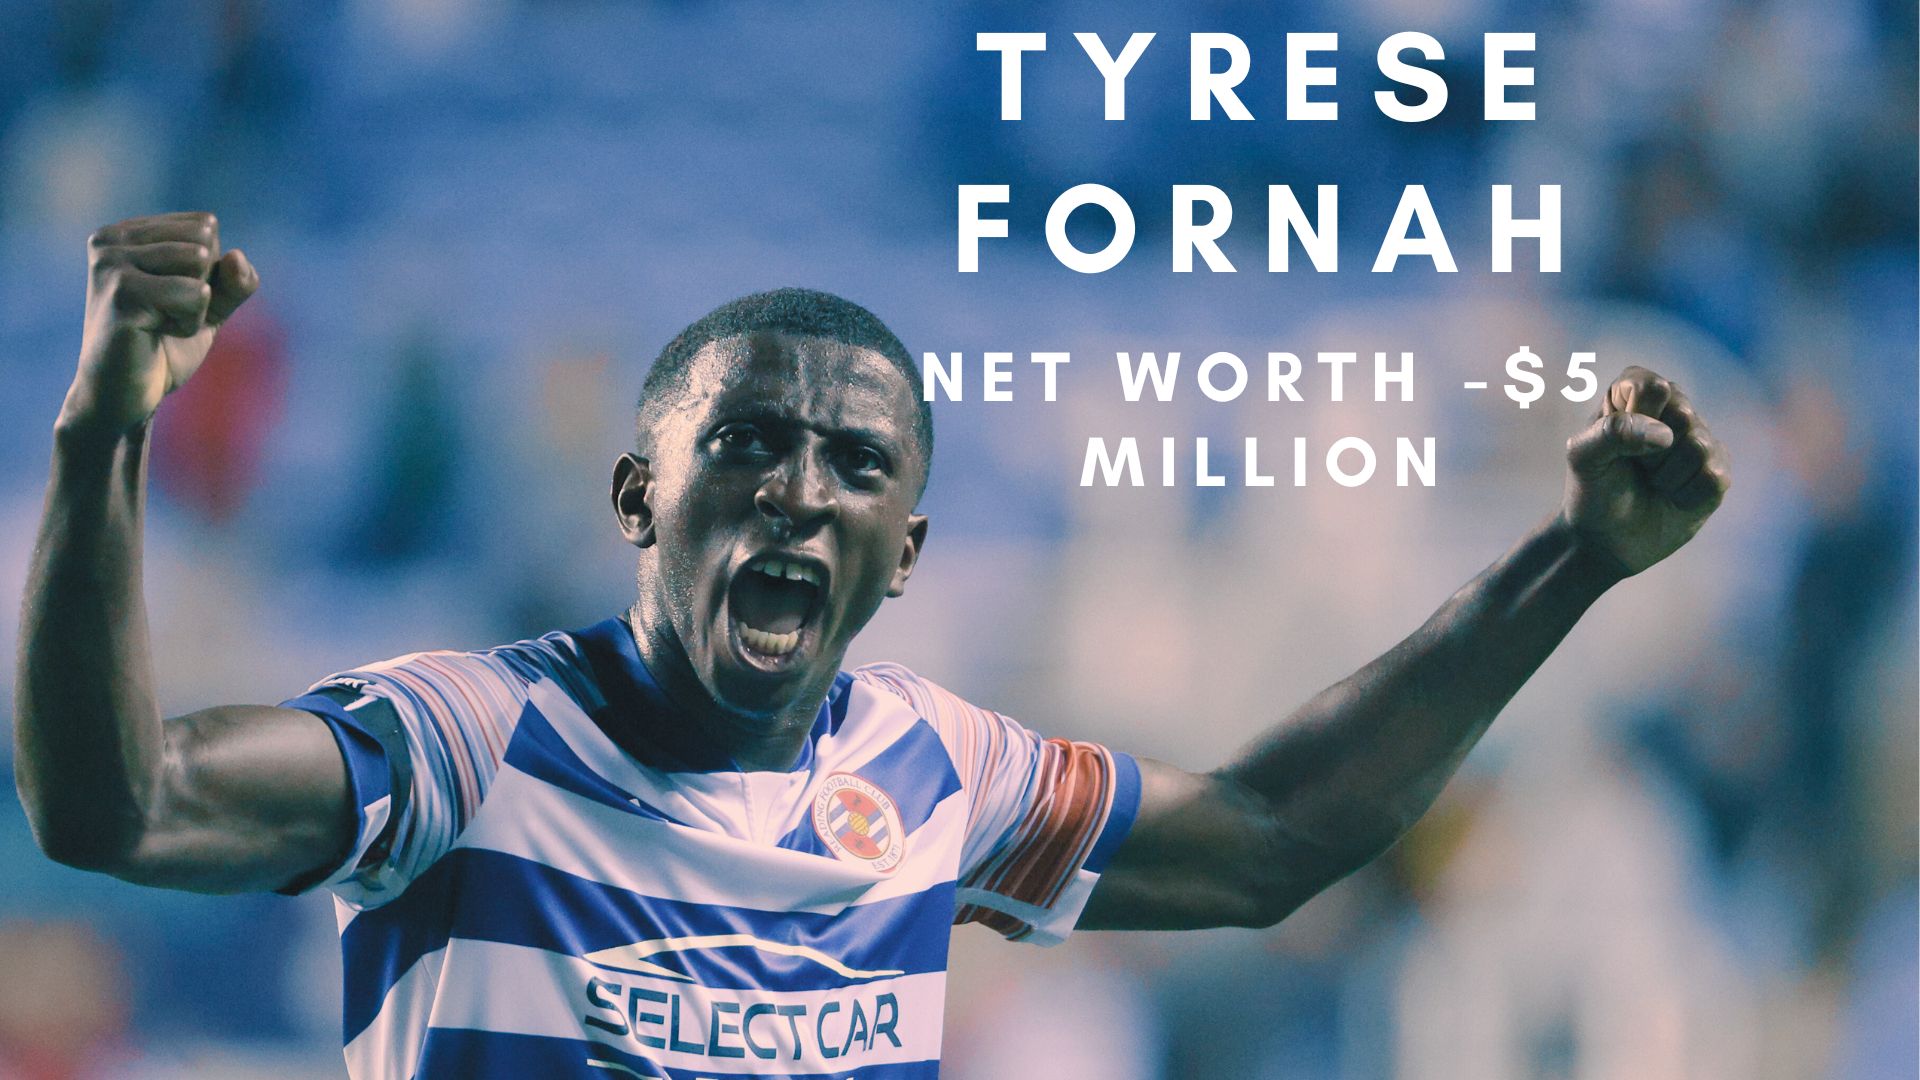 Tyrese Fornah of Reading FC celebrates. (Photo by Andrew Redington/Getty Images)